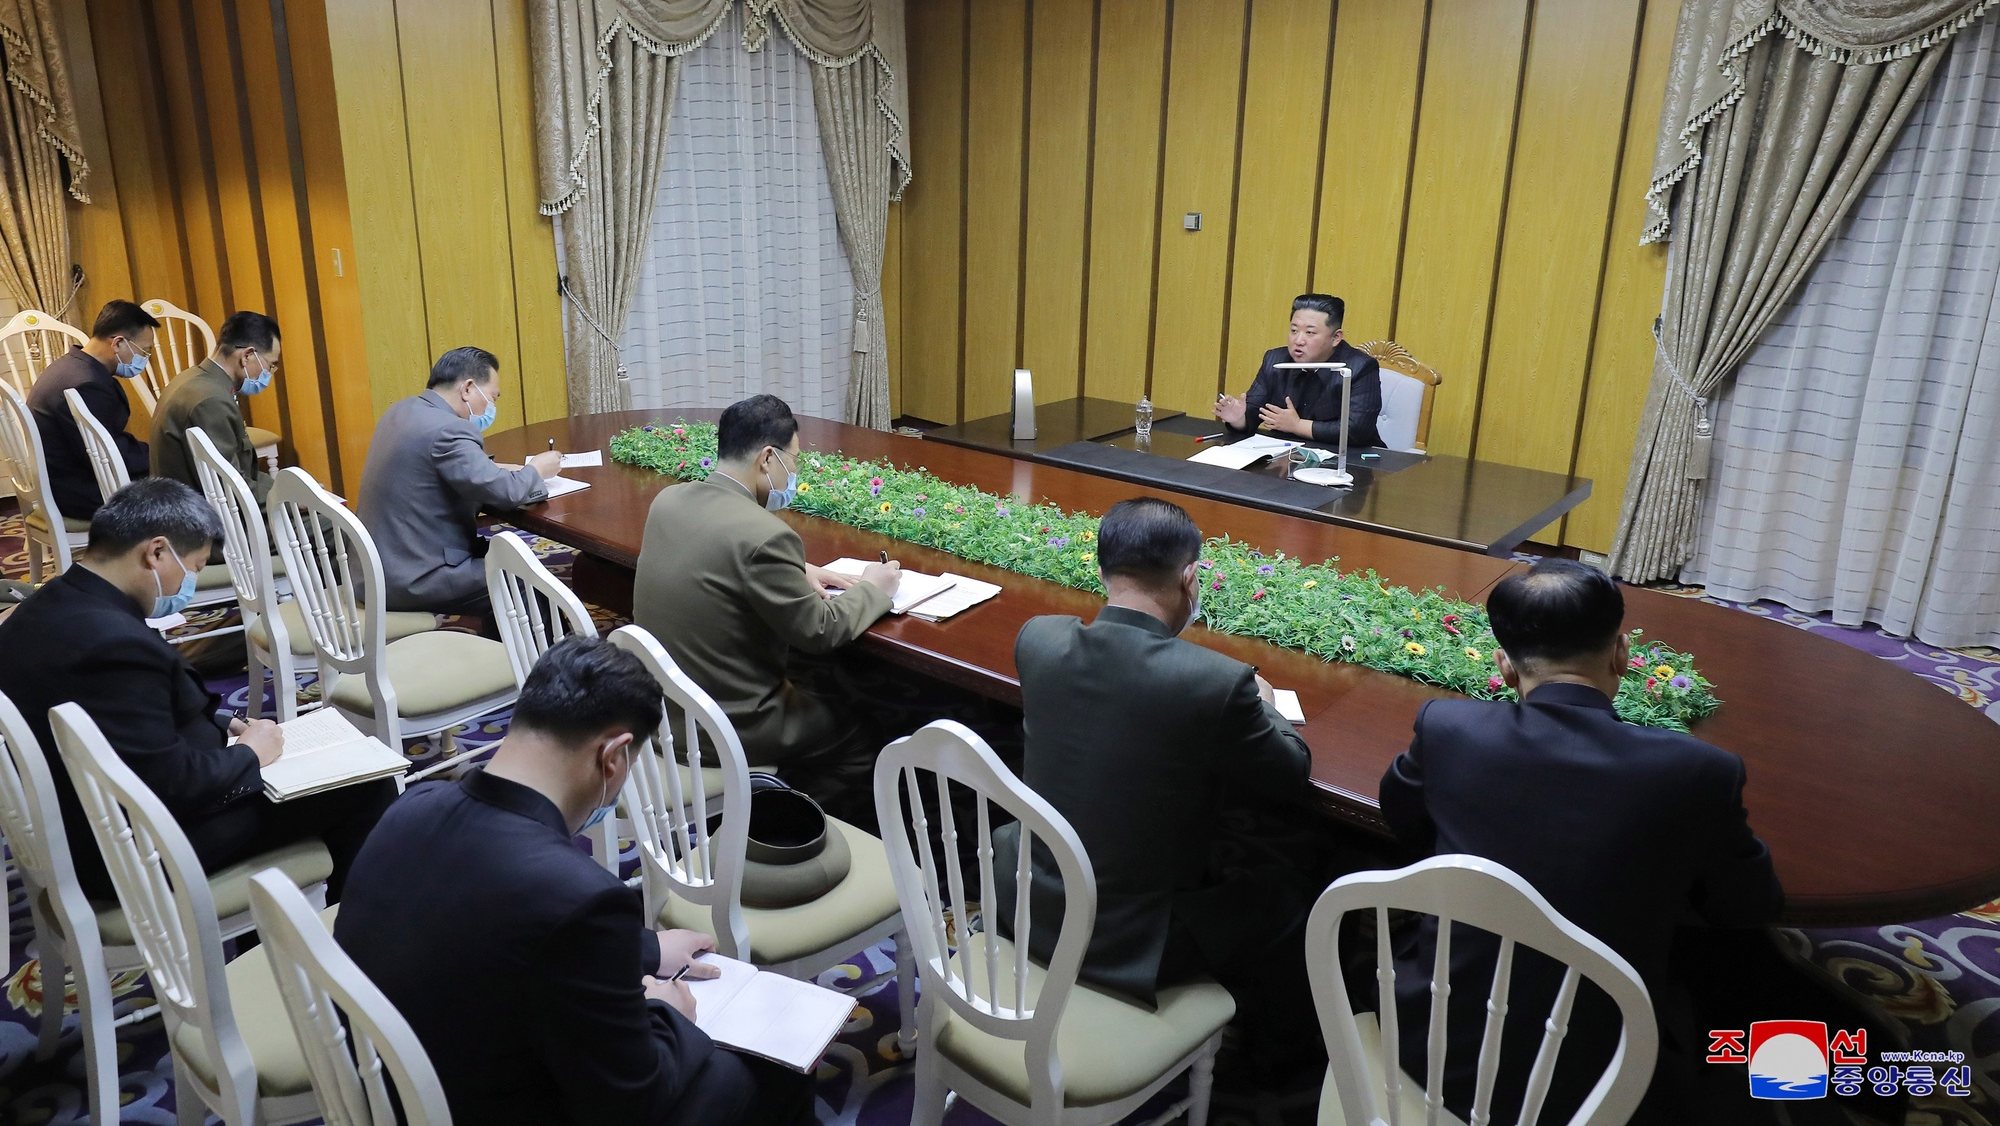 epa09943587 A photo released by the official North Korean Central News Agency (KCNA) shows North Korean Supreme Leader Kim Jong-un visiting the State Emergency Epidemic Prevention Command in Pyongyang, North Korea, 12 May 2022 (issued 13 May 2022). On 12 May 2022, the North Korean state media agency (KCNA) announced an outbreak of COVID-19 in the country. A nation-wide lockdown was instituted in response and On 13 May, the first COVID-19 related deaths were reported.  EPA/KCNA   EDITORIAL USE ONLY